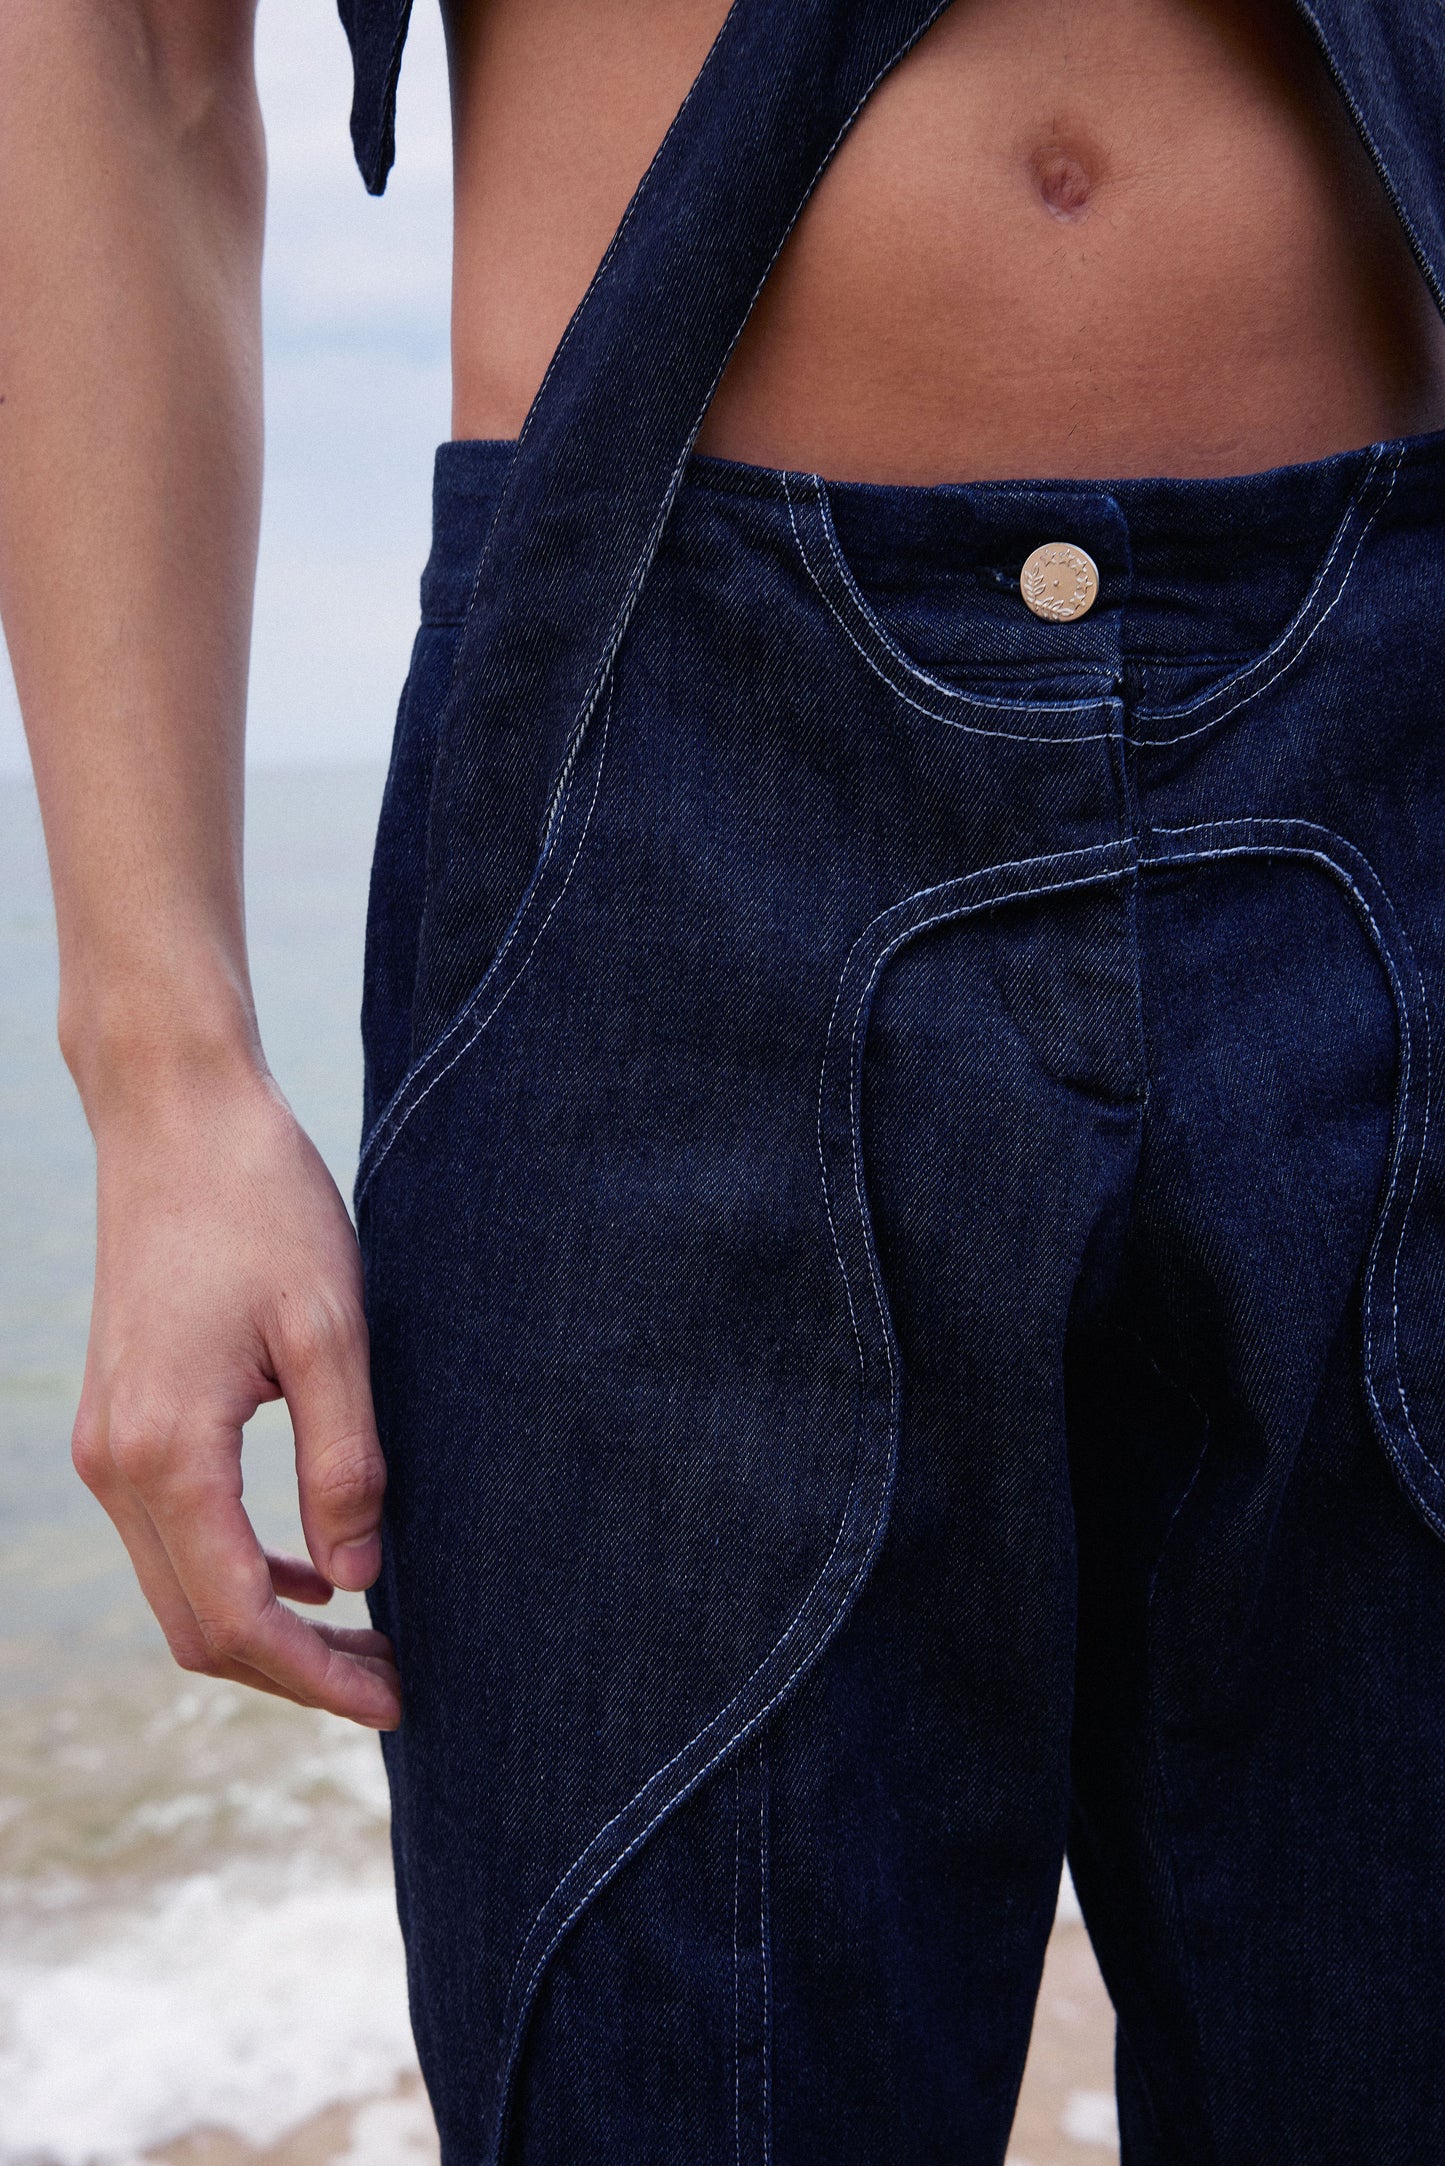 Two Oceans Denim Jeans (Low rise or High rise)